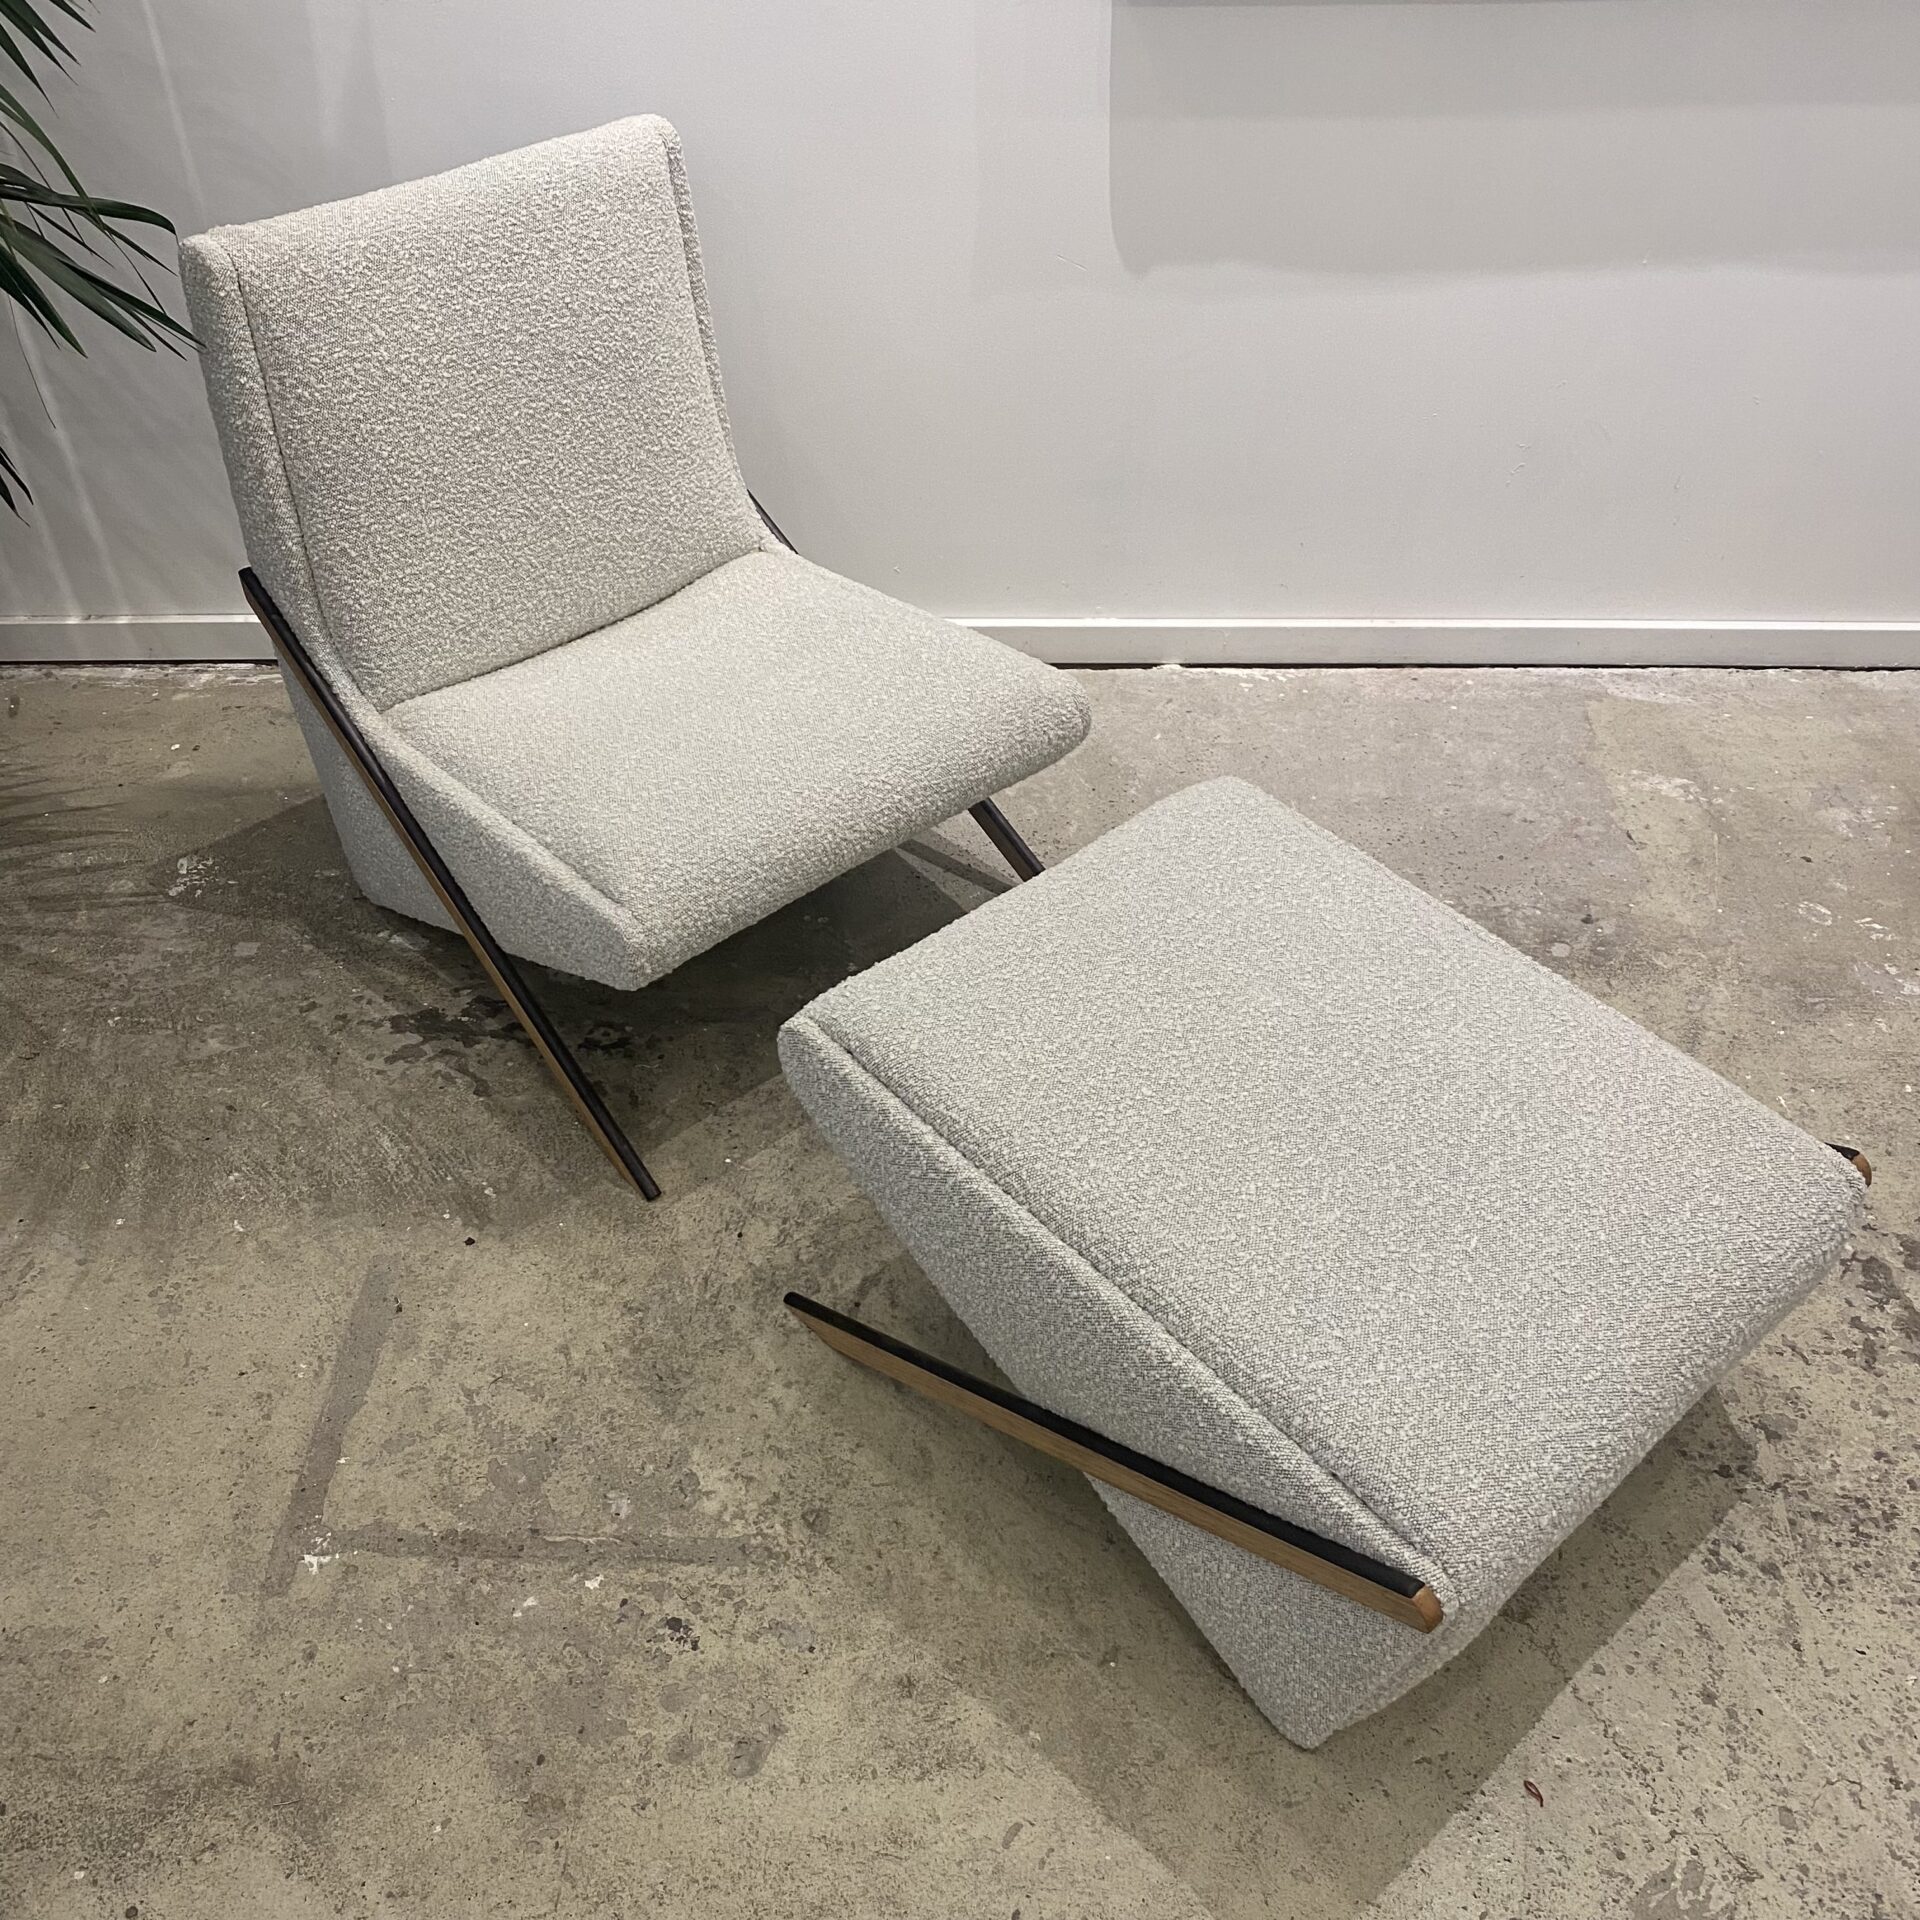 Australian Made Boomerang Chair with Matching Footstool.